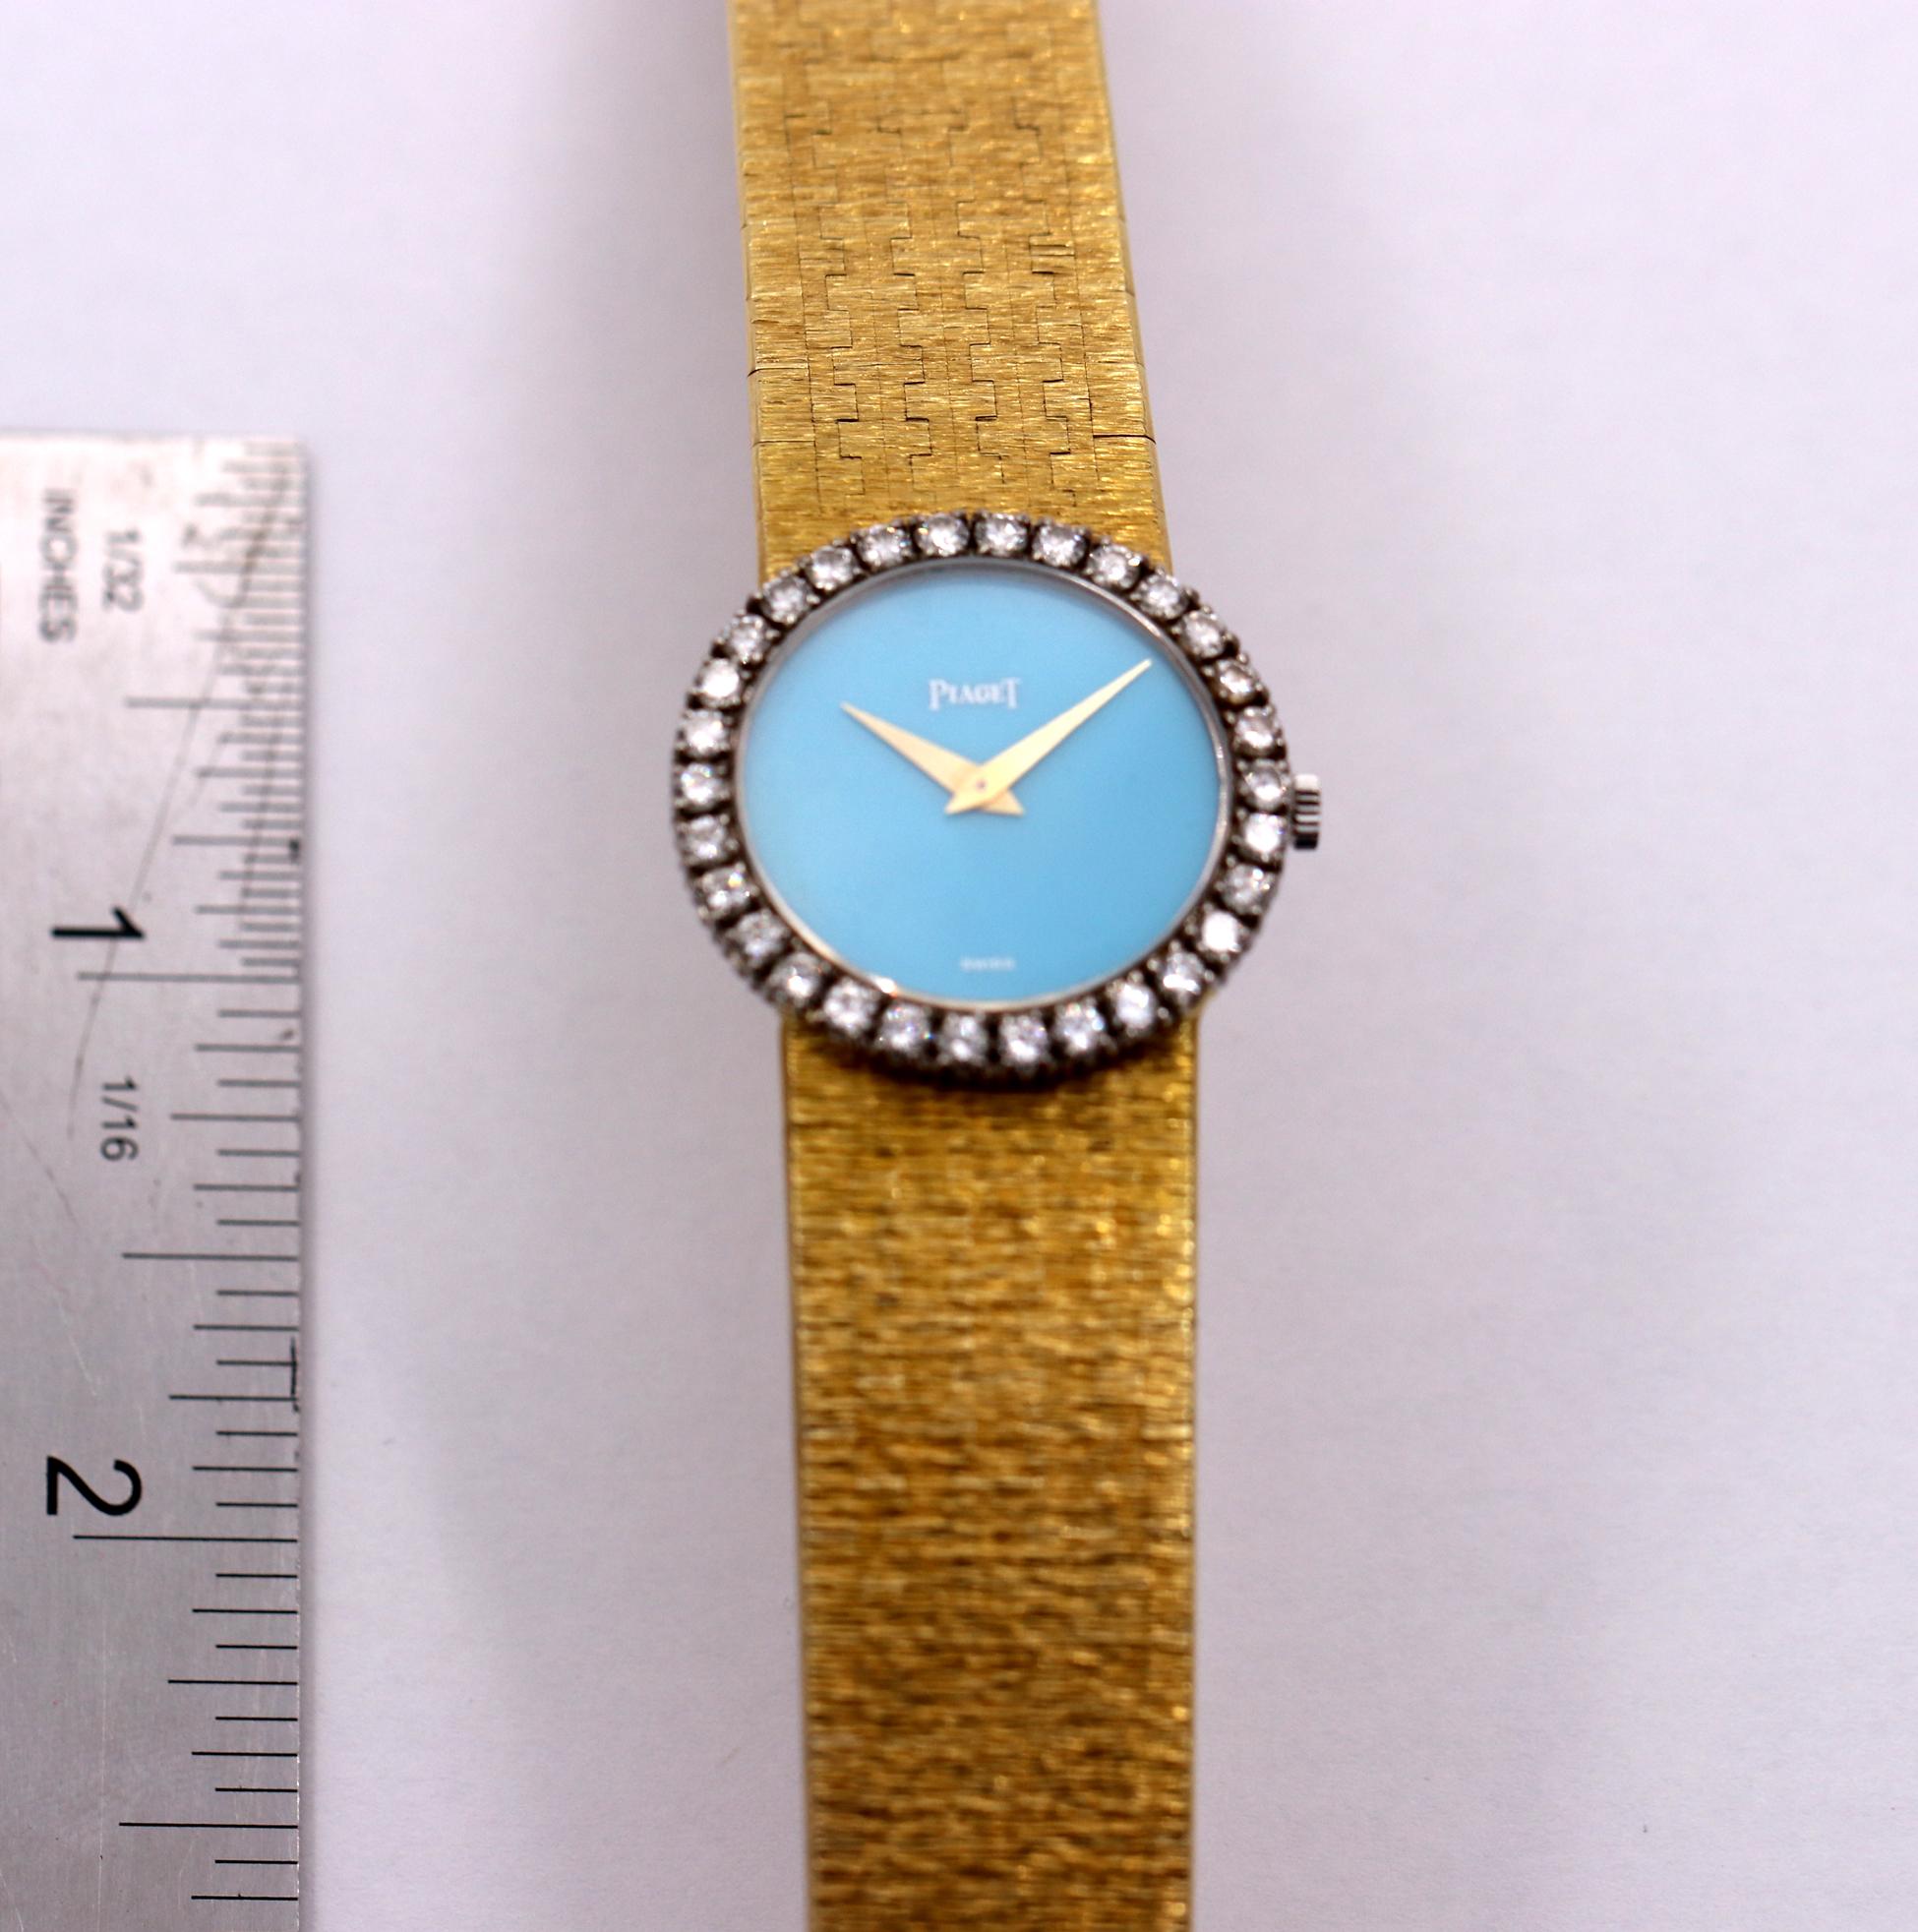 Gold Piaget Wristwatch with Turquoise Dial and Diamond Bezel 3